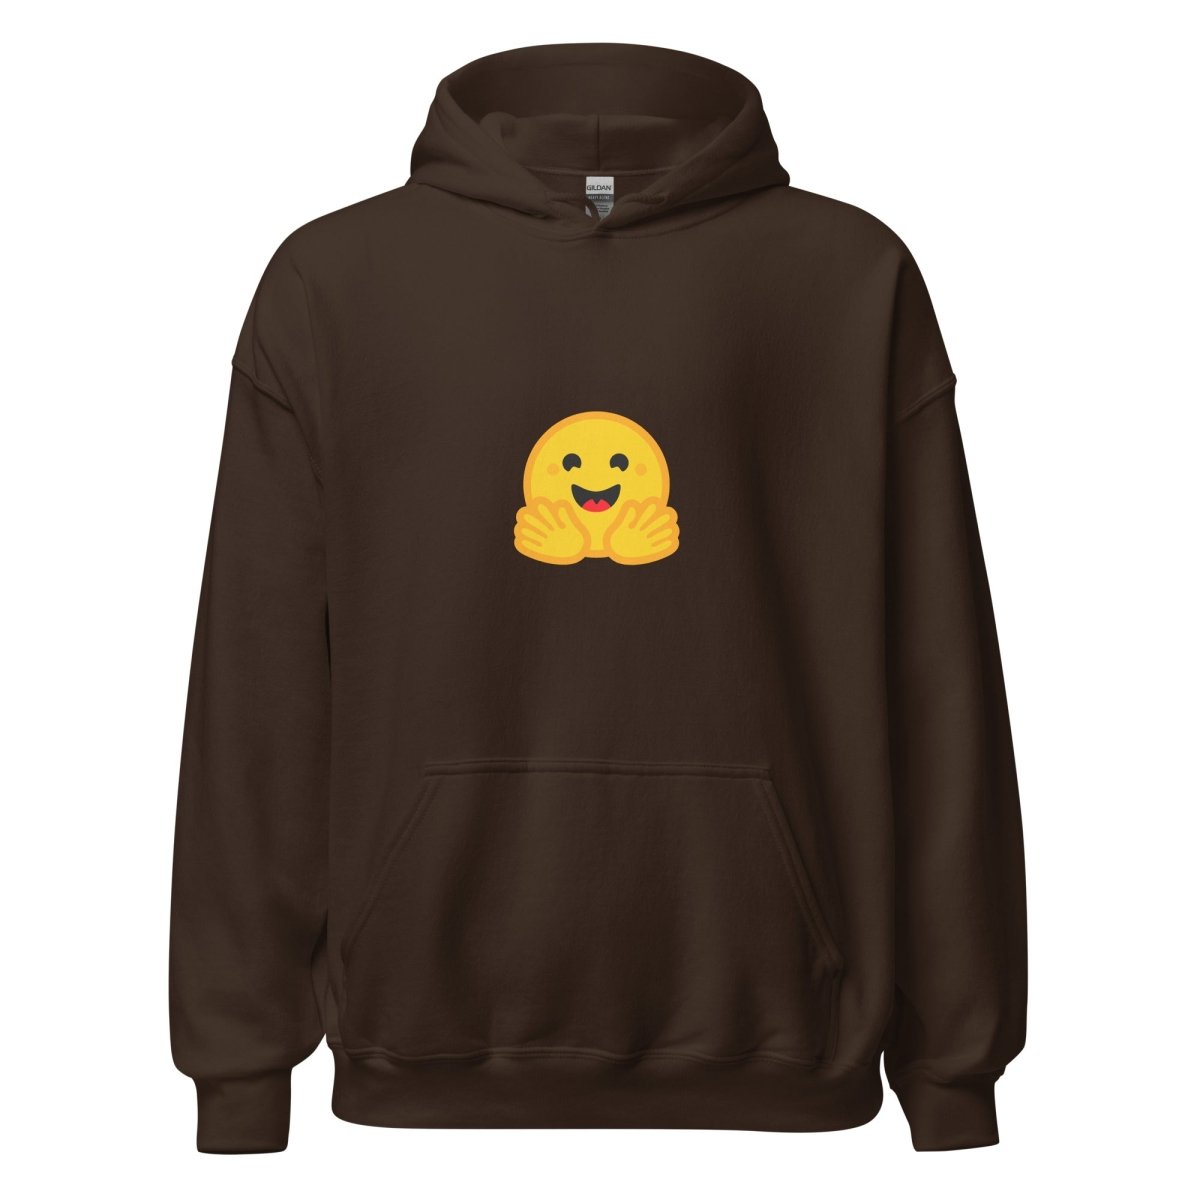 Hugging Face Small Icon Hoodie - Dark Chocolate - AI Store